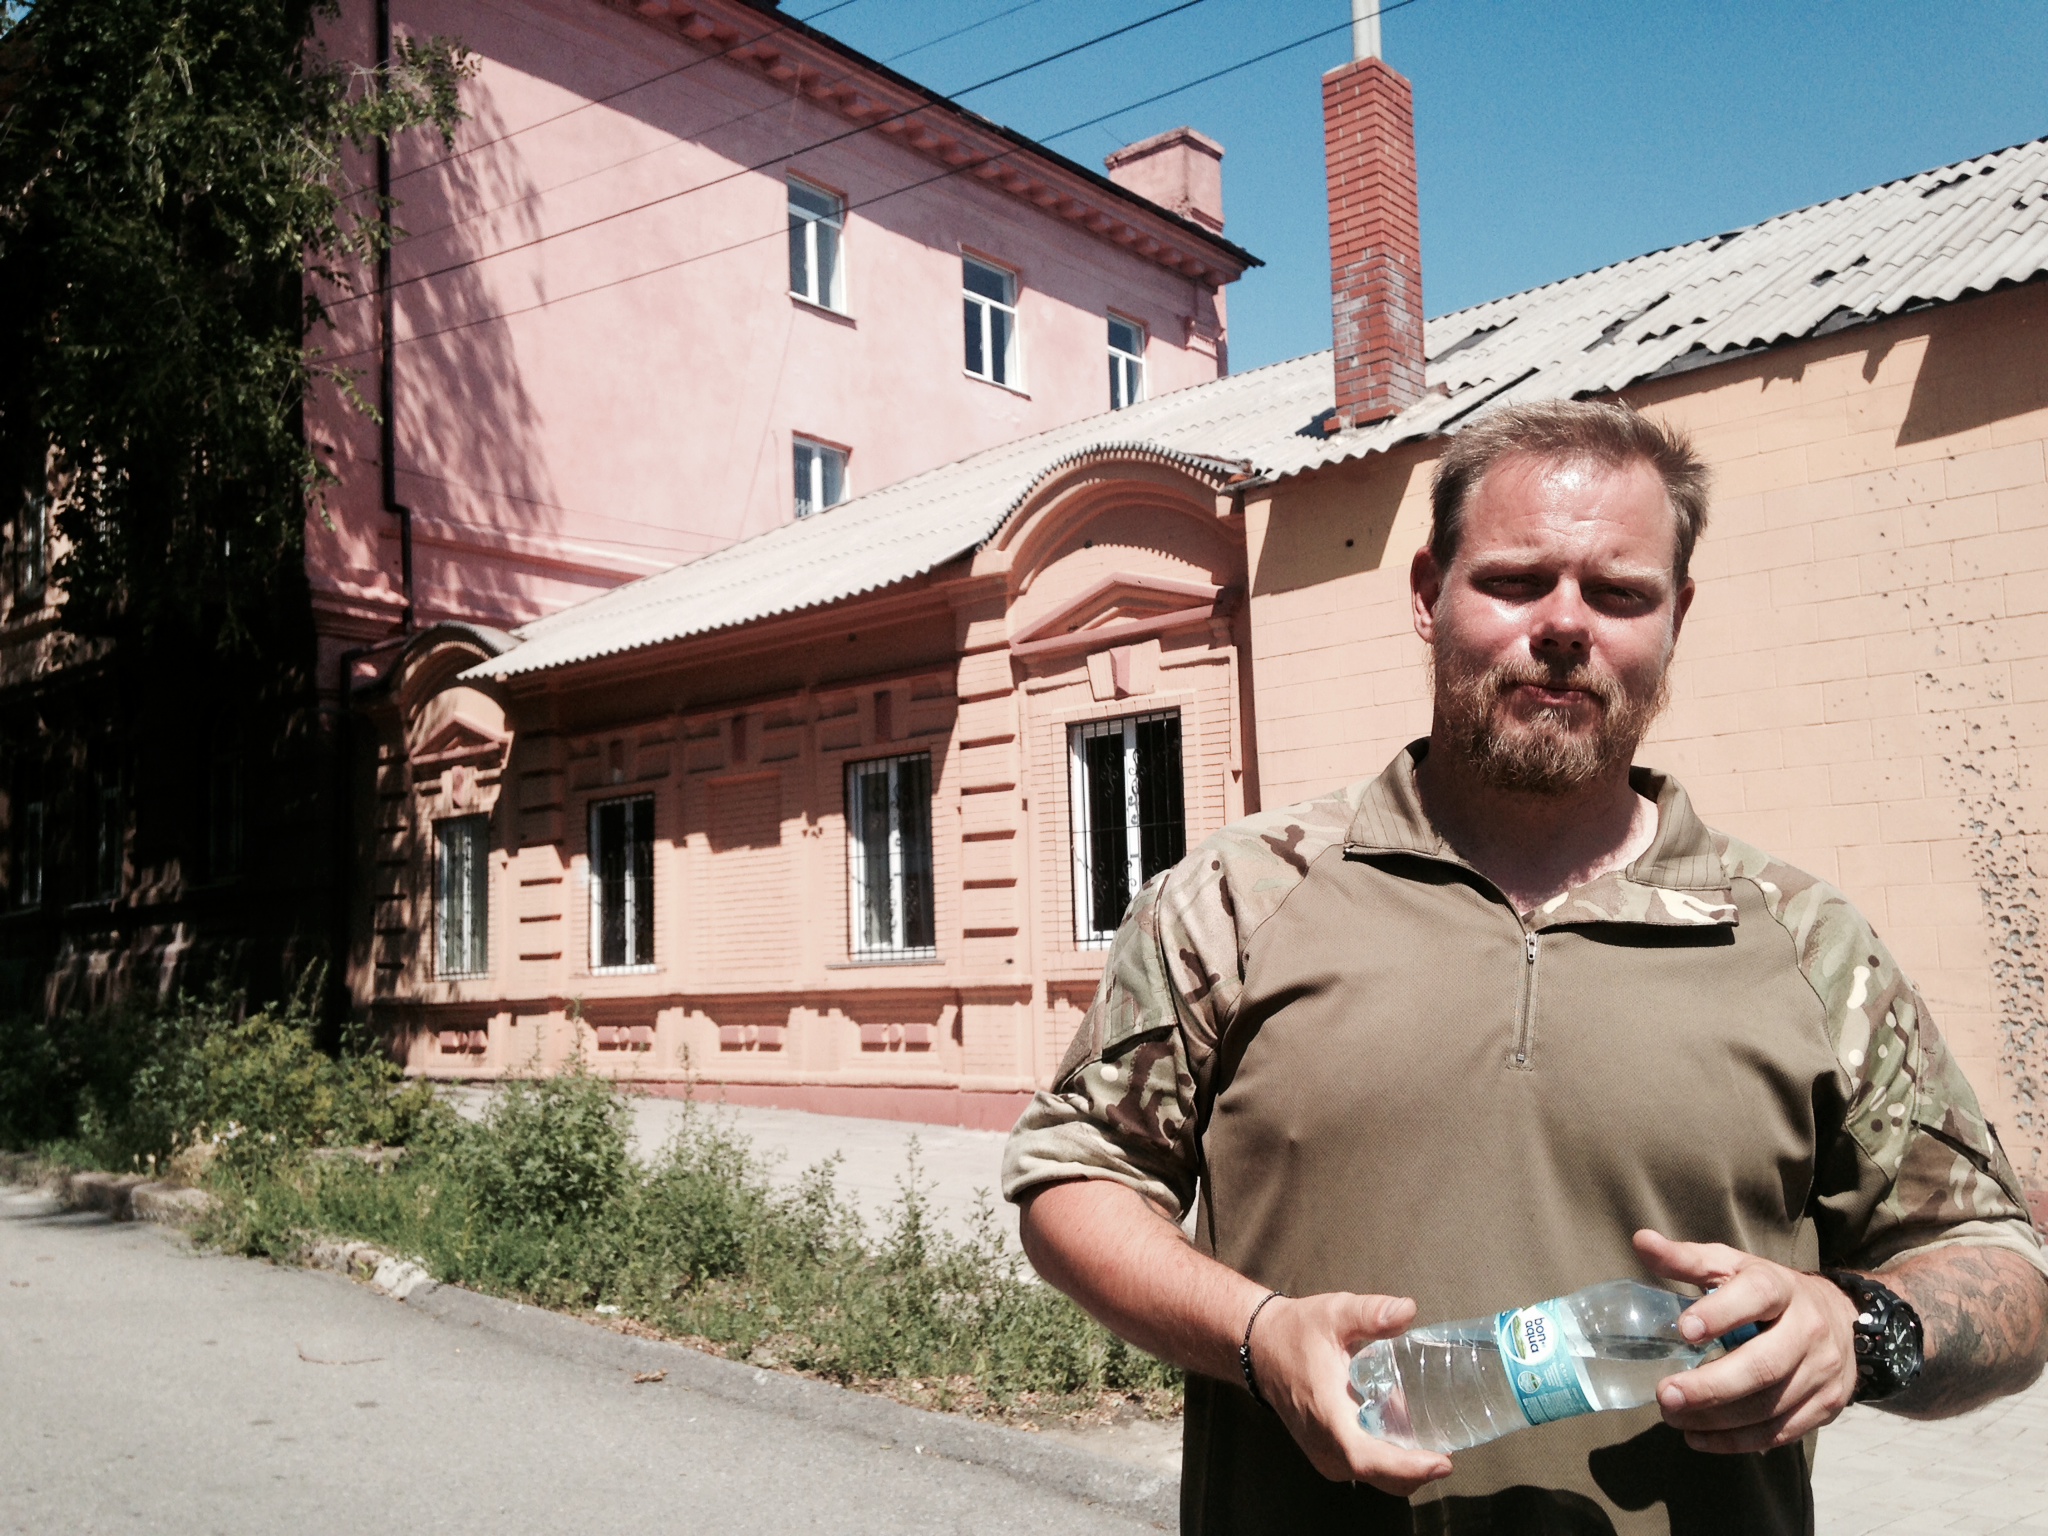 Skillt in Mariupol at the scene of his first battle. The school house and third-floor window are in the background. (Photo: Nolan Peterson/The Daily Signal)    